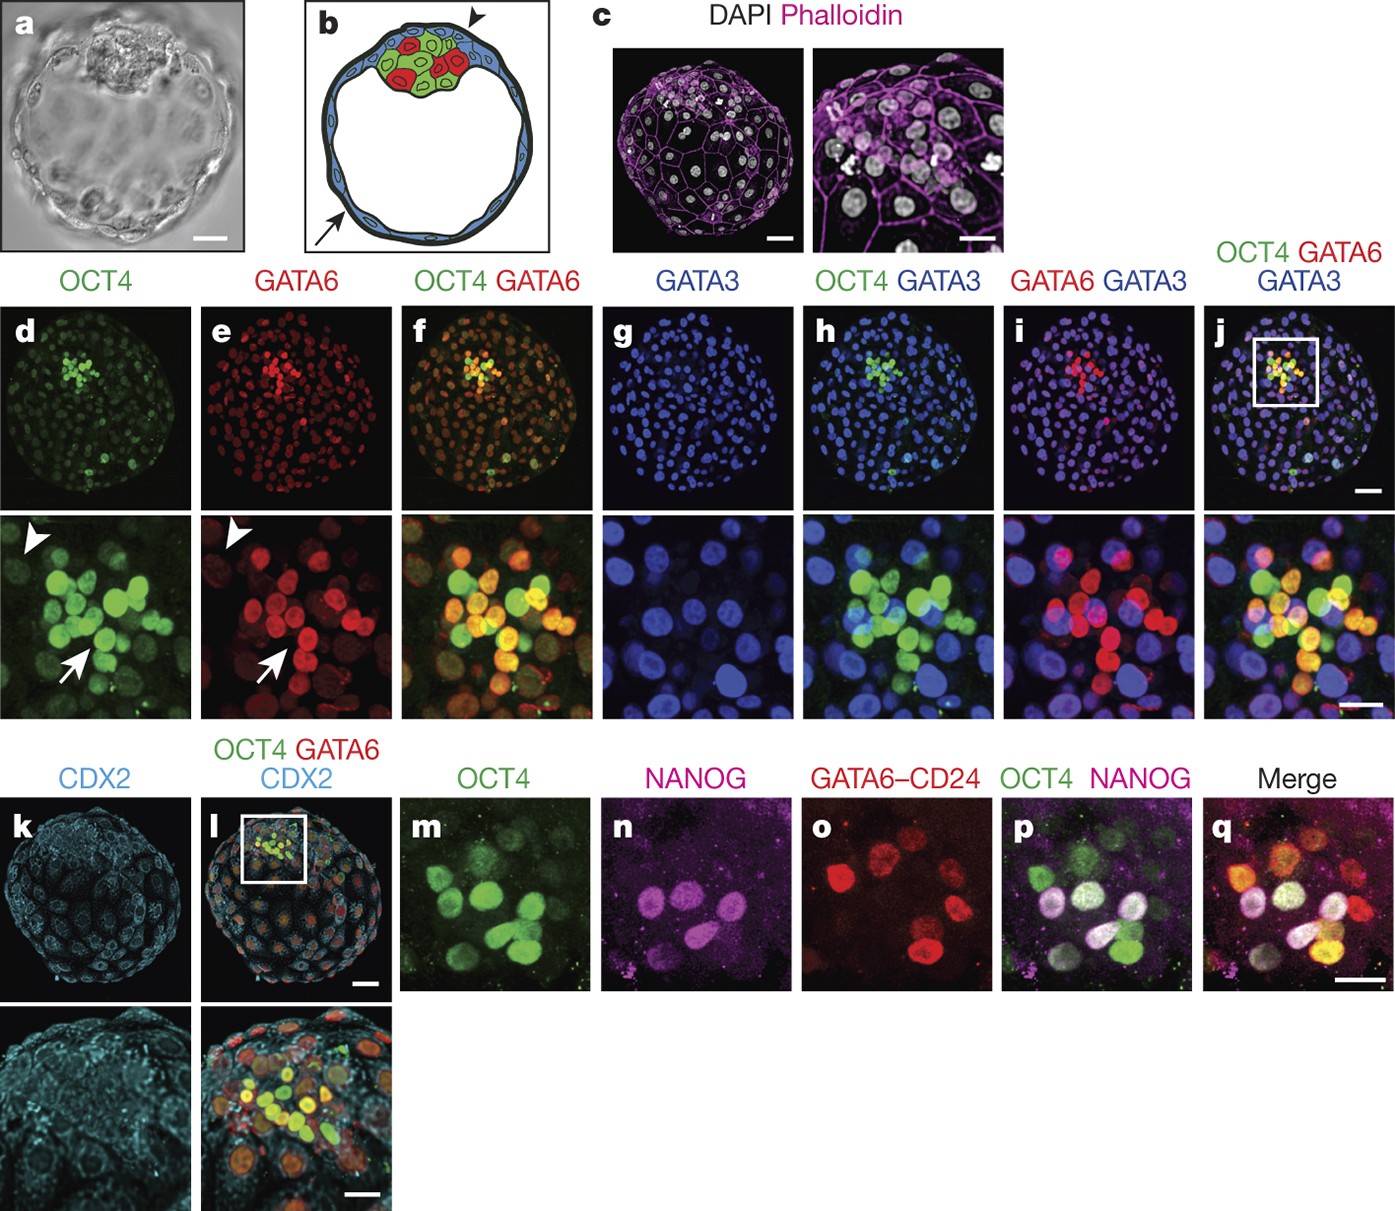 Self-organization of the in vitro attached human embryo | Nature